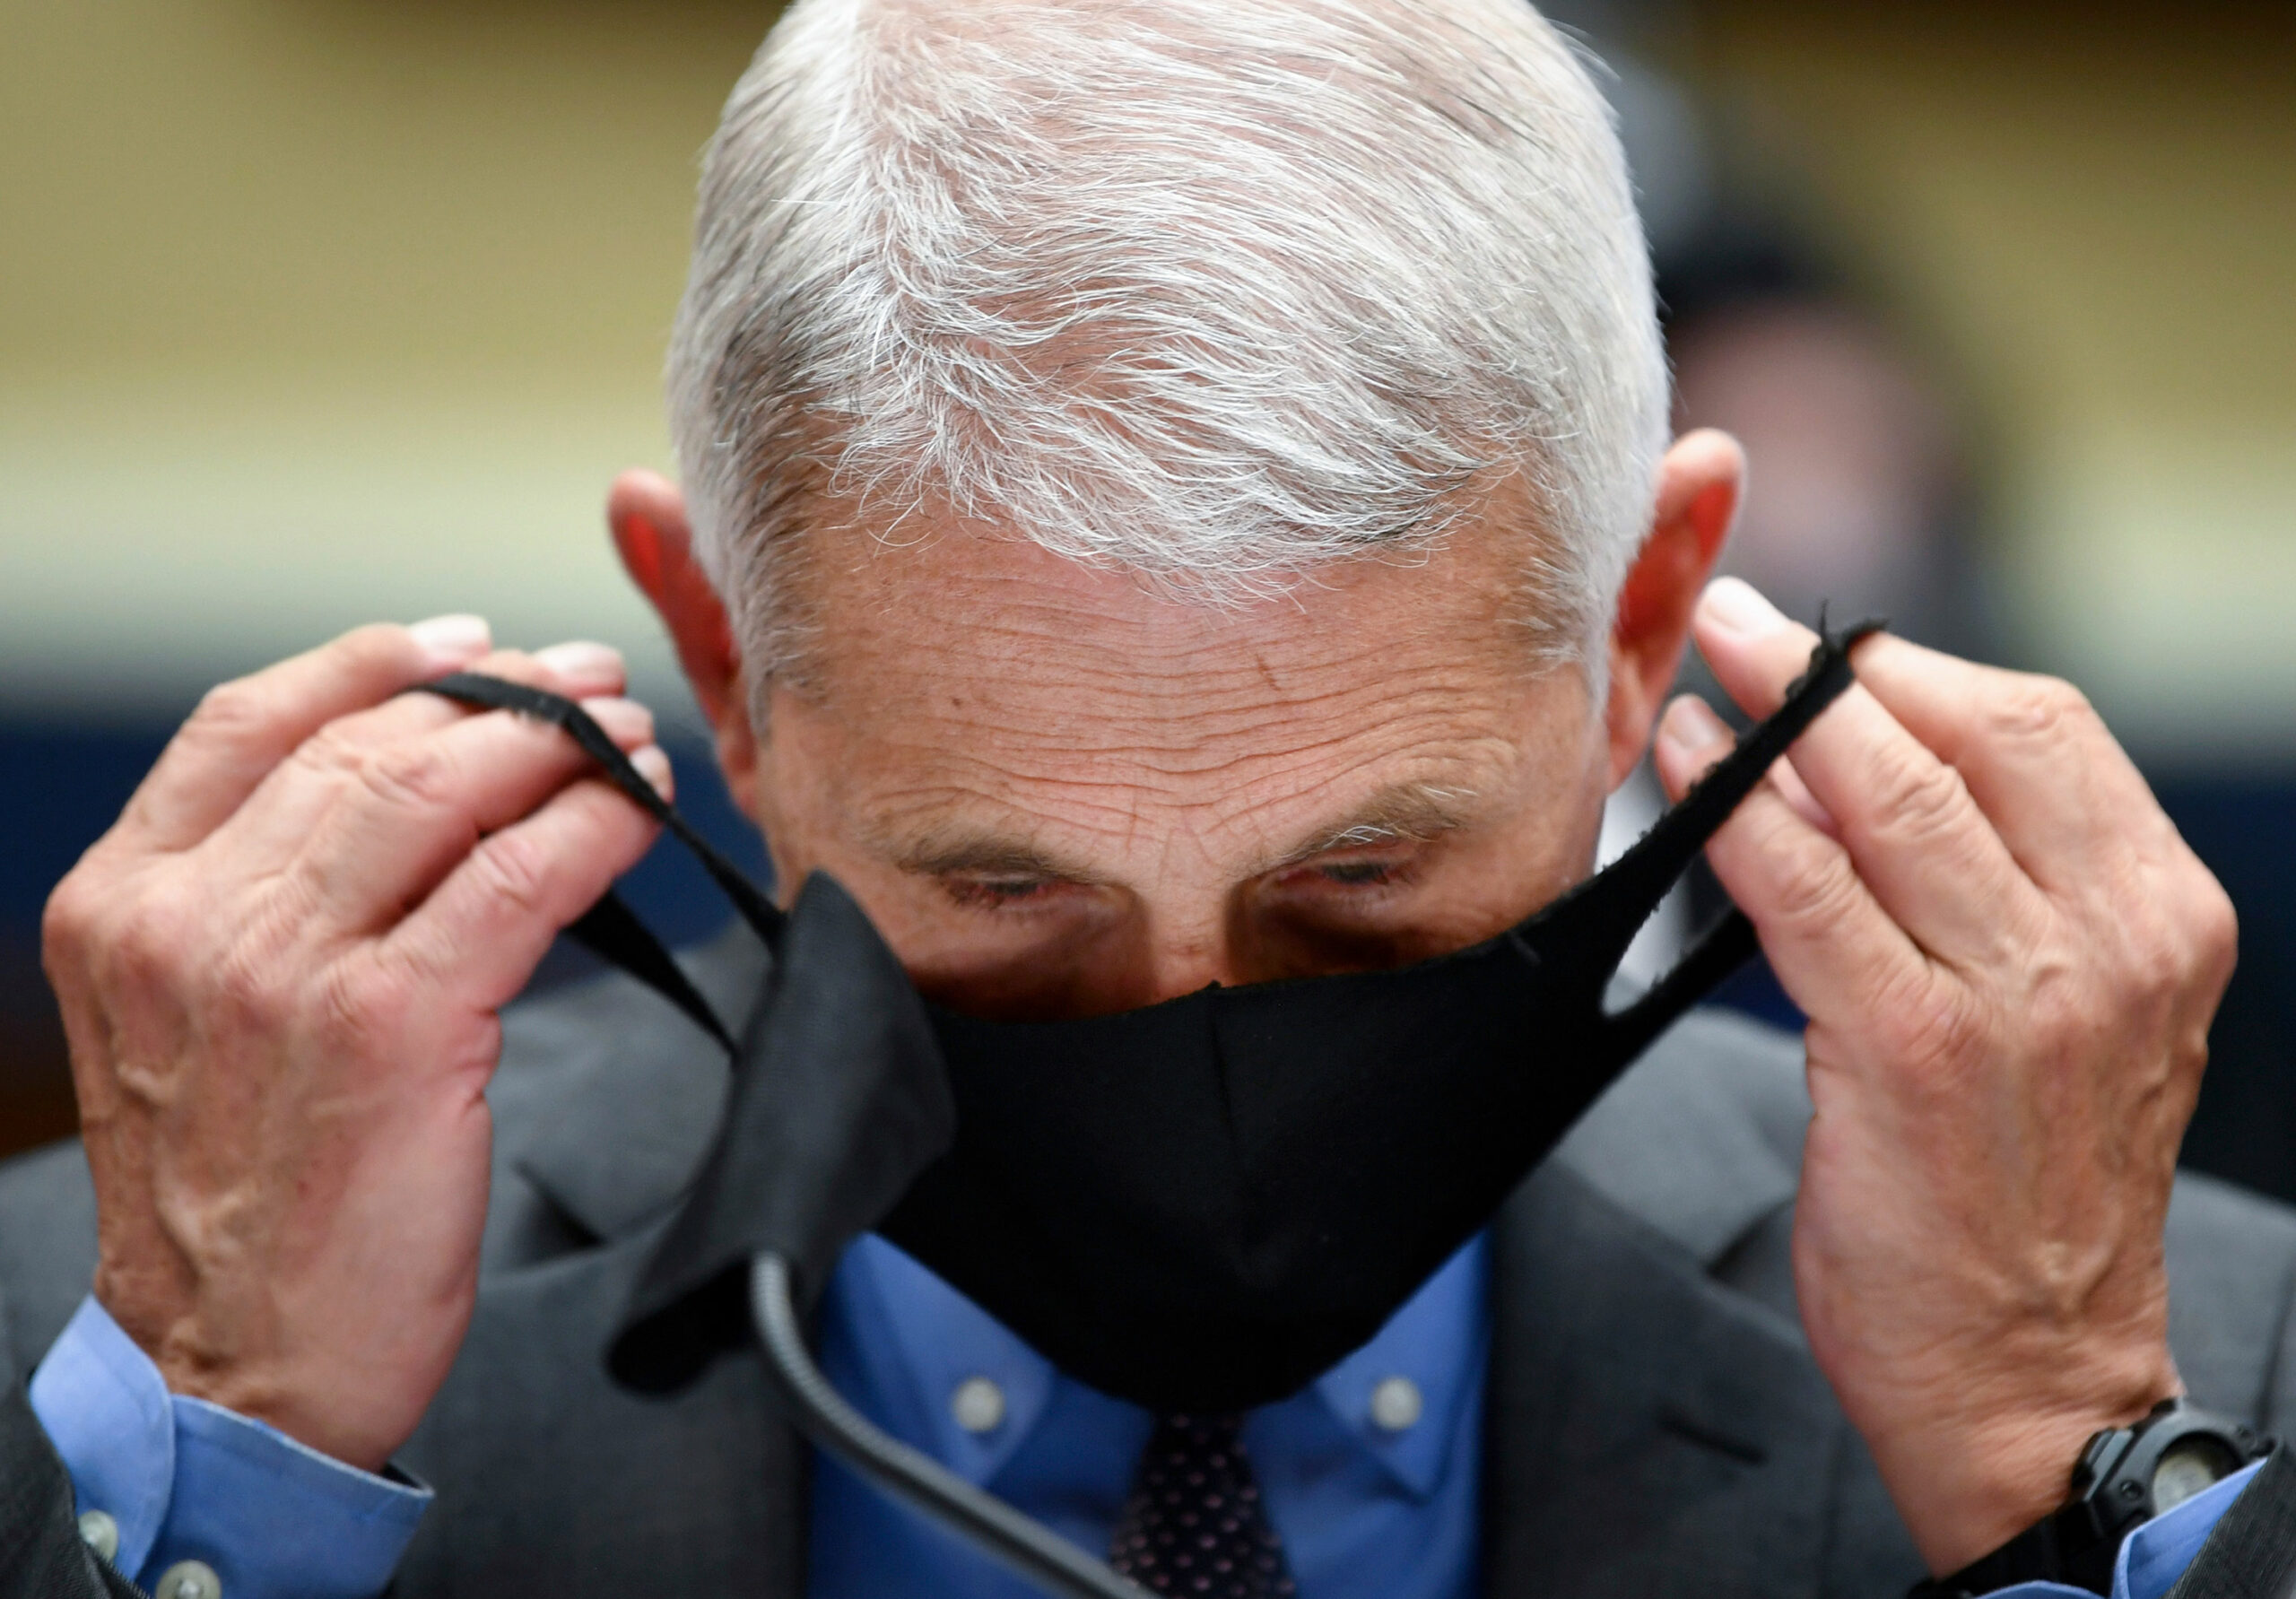 Wearing face masks to stop the spread of coronavirus should not be a political issue, Fauci says